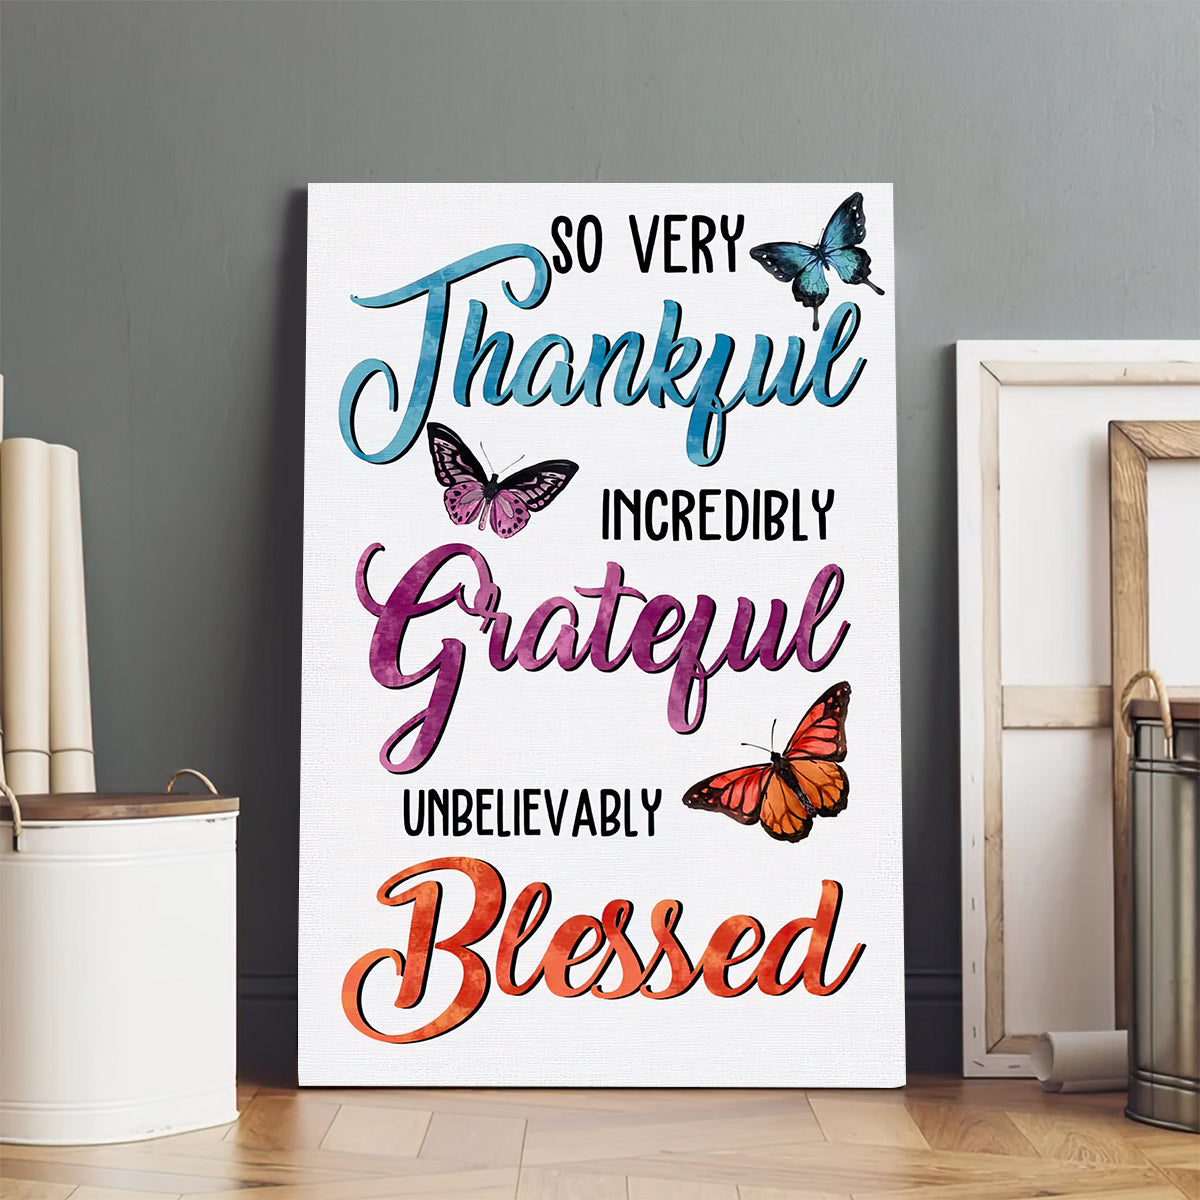 So Very Thankful Incredibly Grateful Unbelievably Blessed Butterflies Canvas Wall Art - Poster To Print